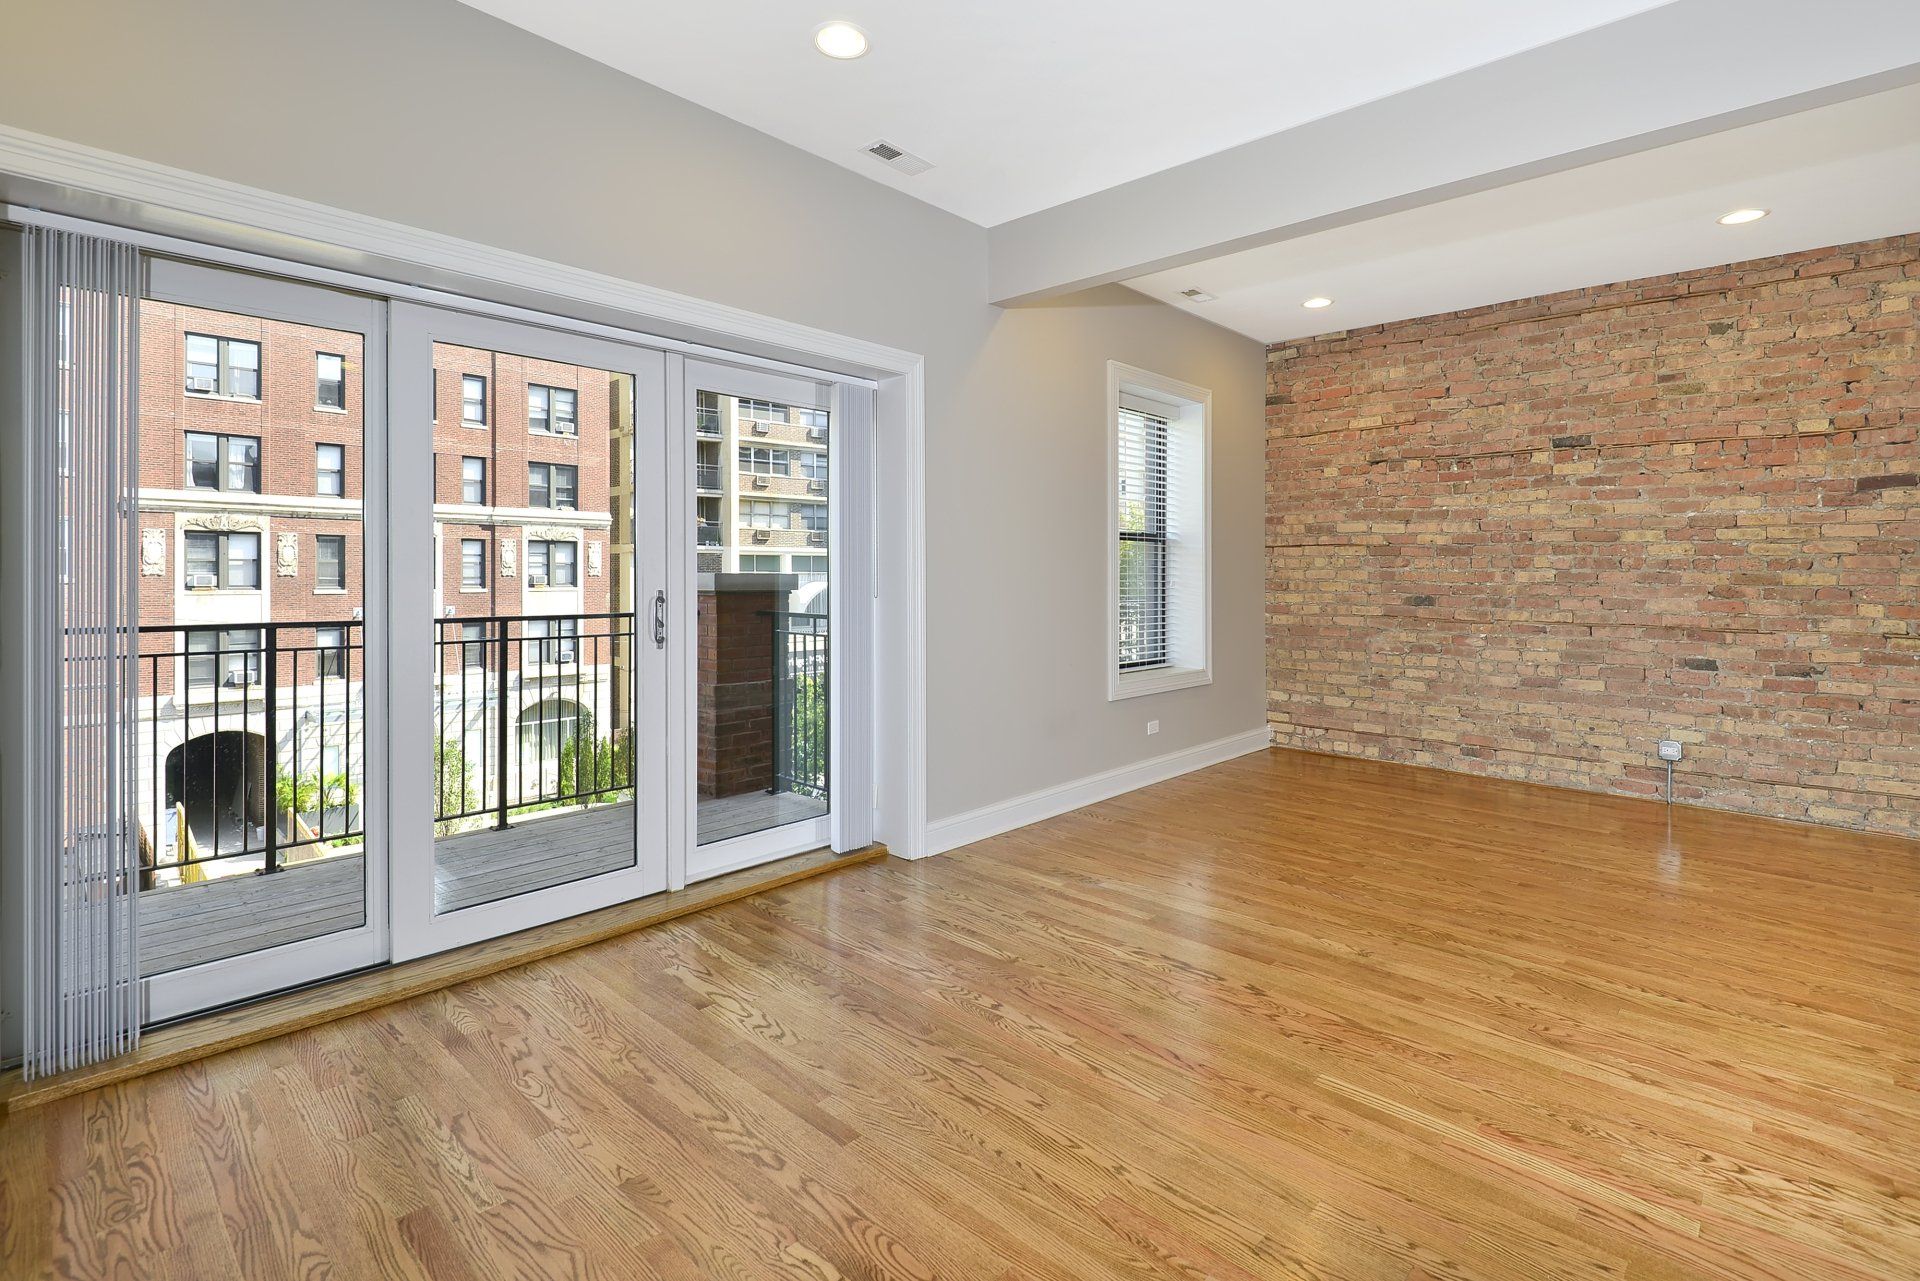 An empty living room with hardwood floors and a brick wall with exit door to the balcony.